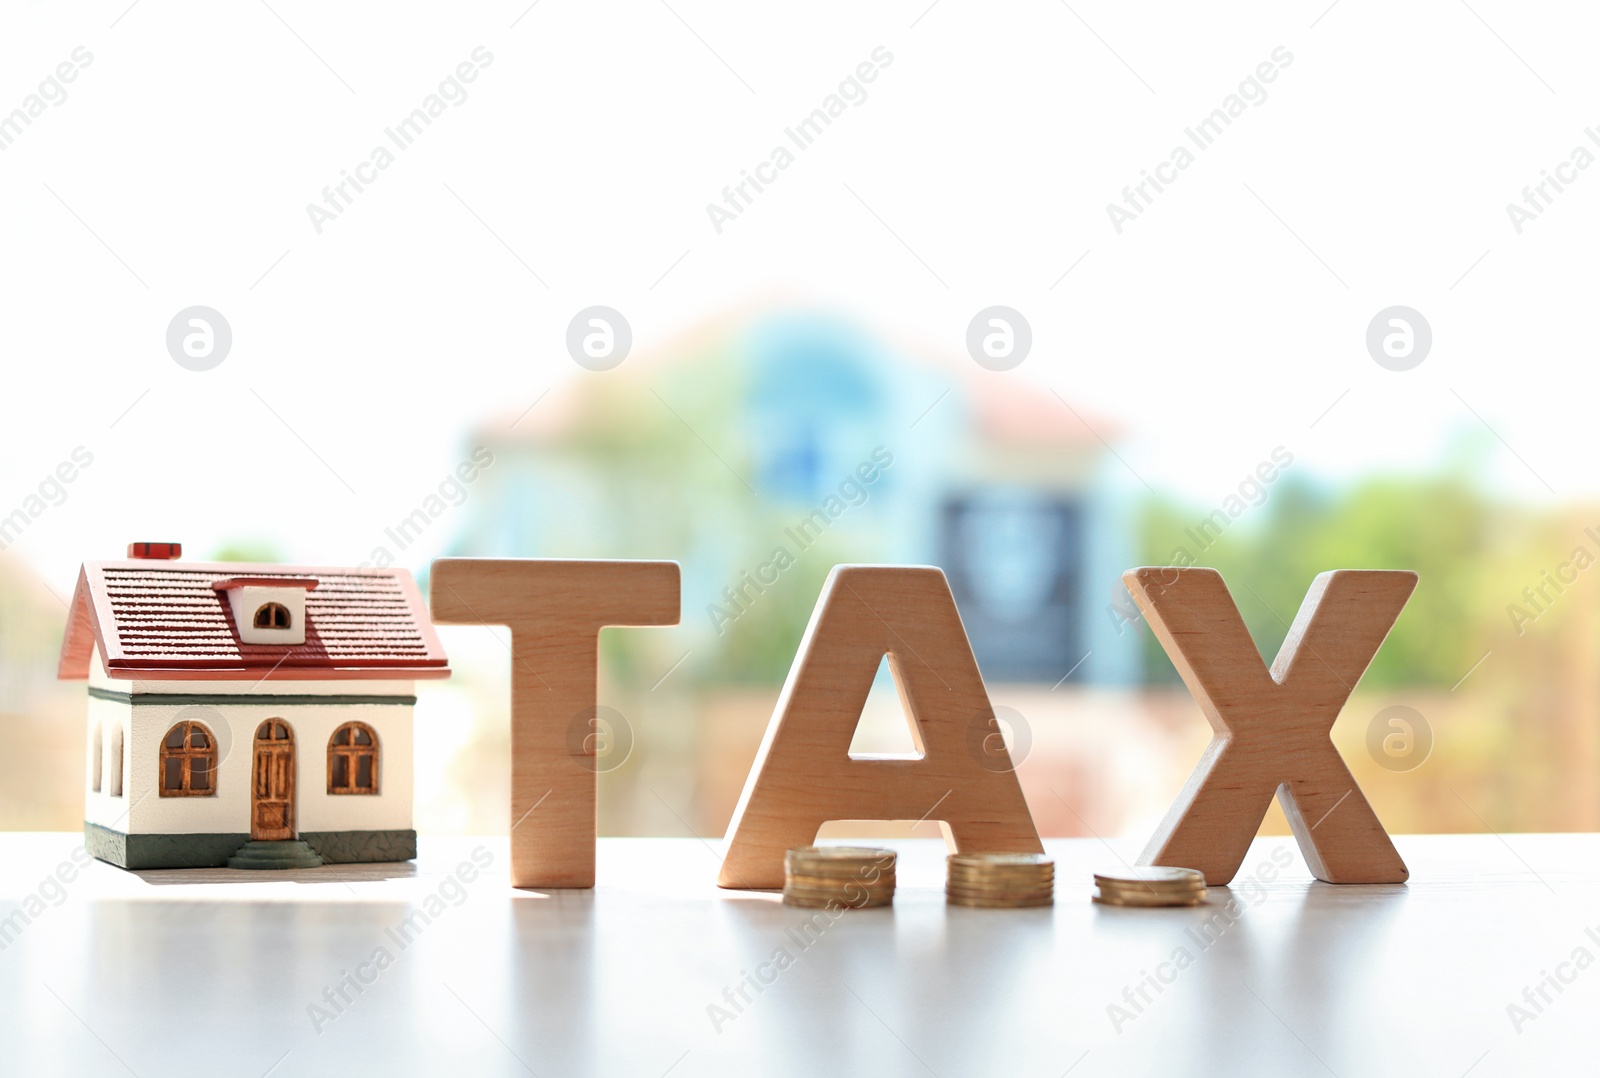 Photo of Word TAX, house model and coins on table against blurred background